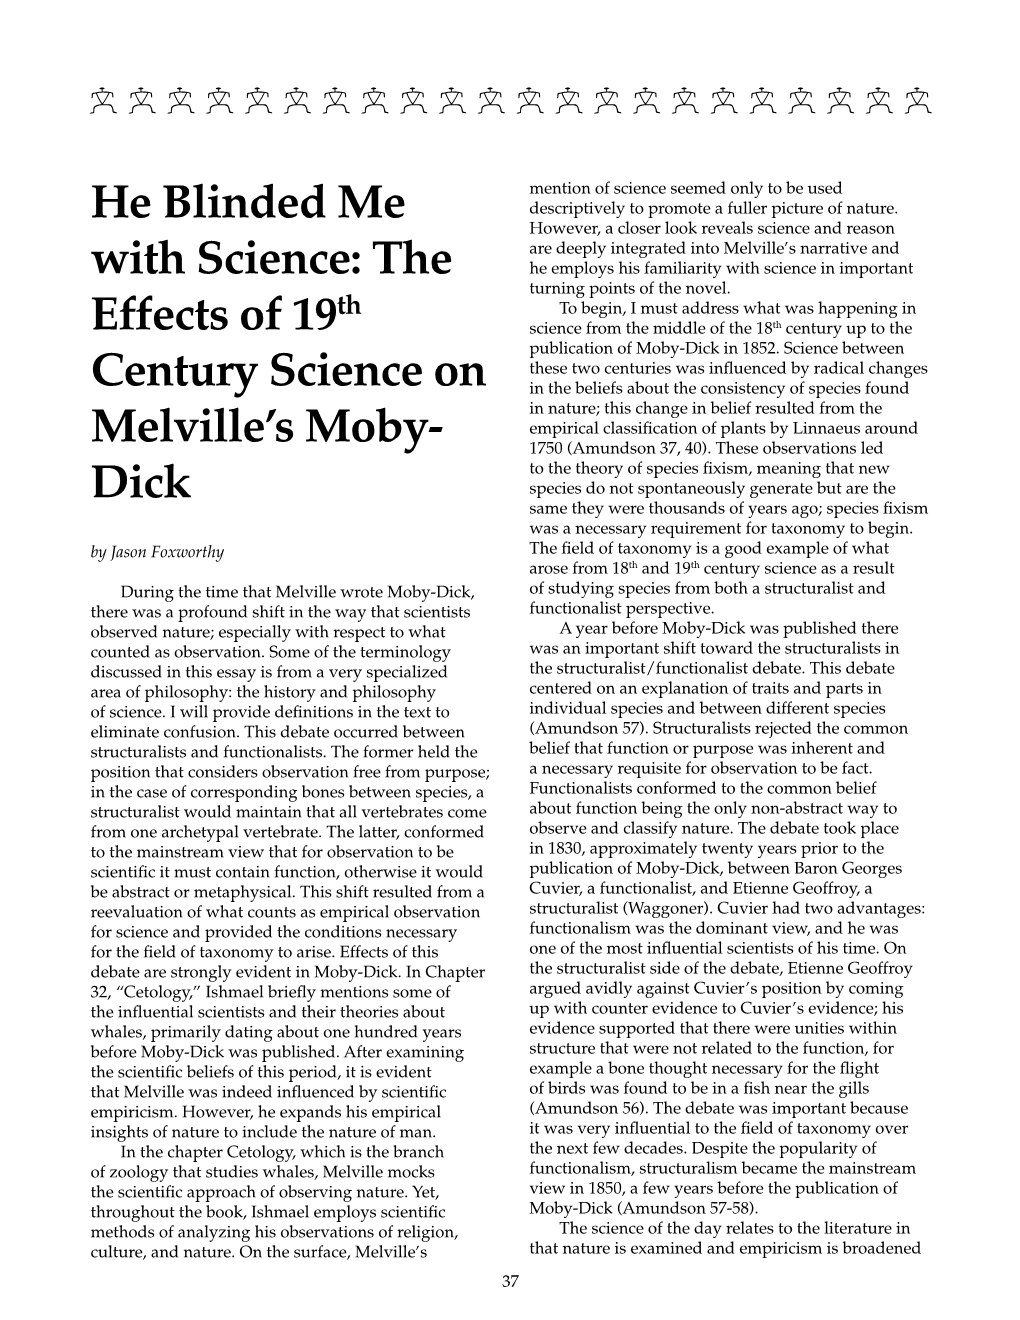 He Blinded Me with Science: the Effects of 19Th Century Science on Melville's Moby-Dick